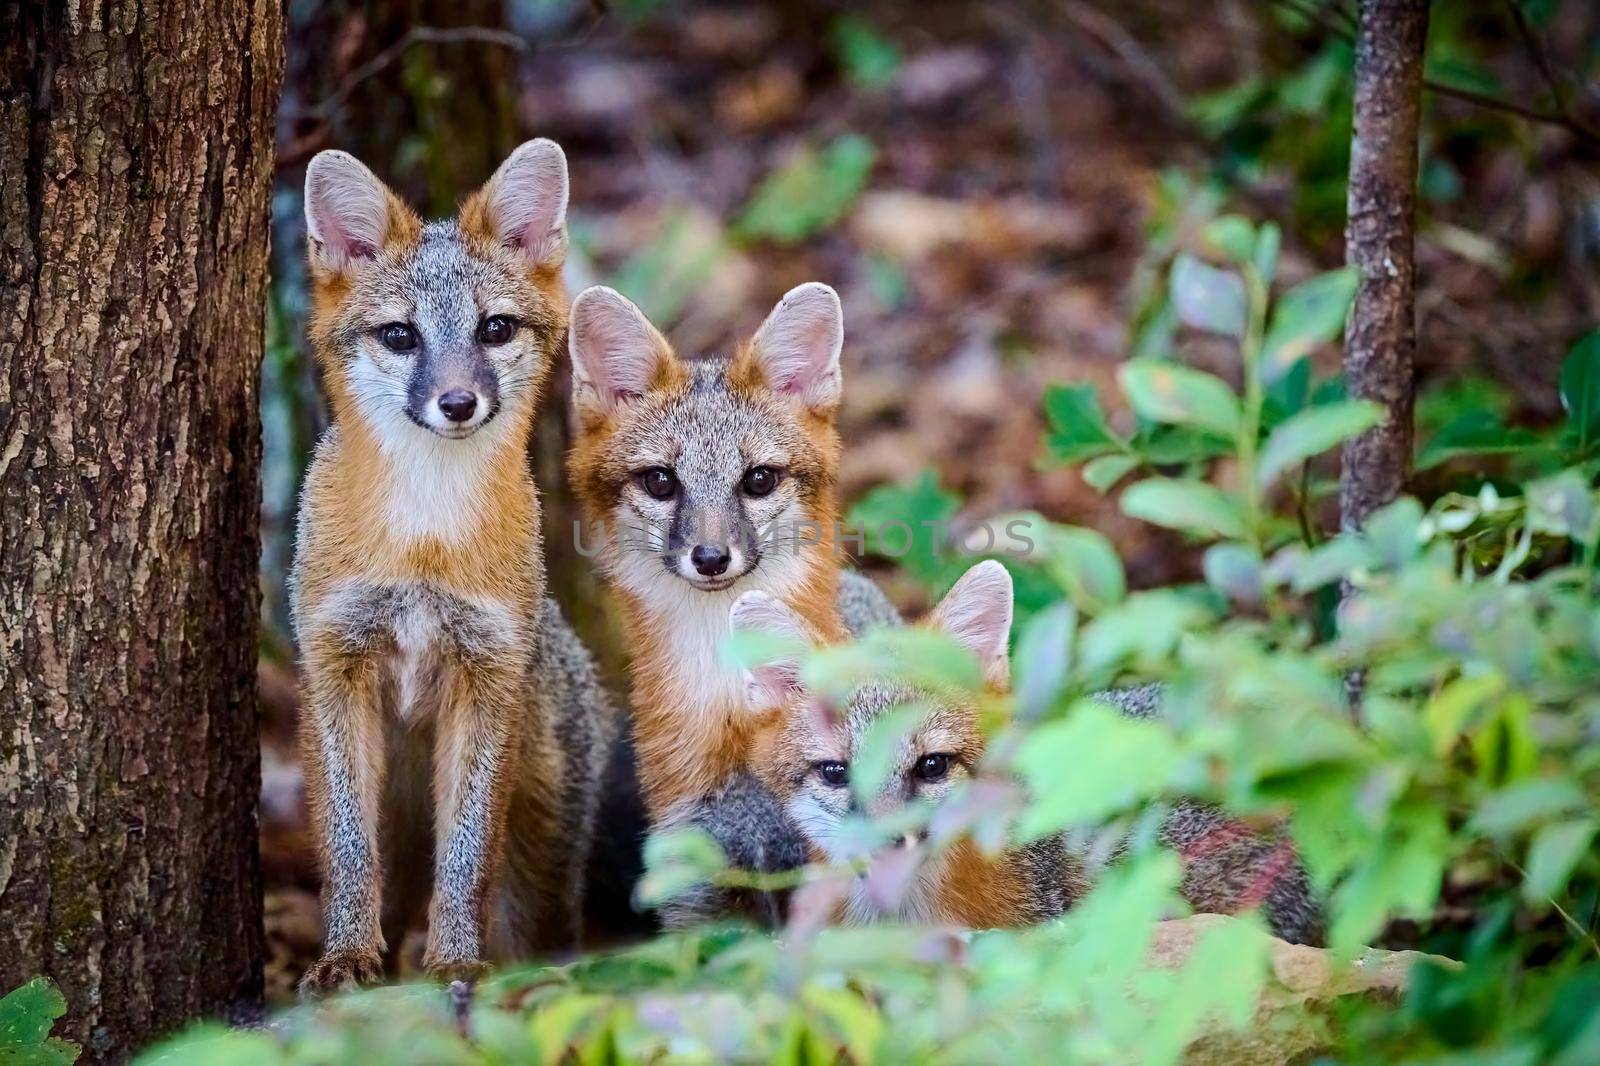 Three Juvenile Gray Fox Kits (Urocyon cinereoargenteus) in a for by patrickstock